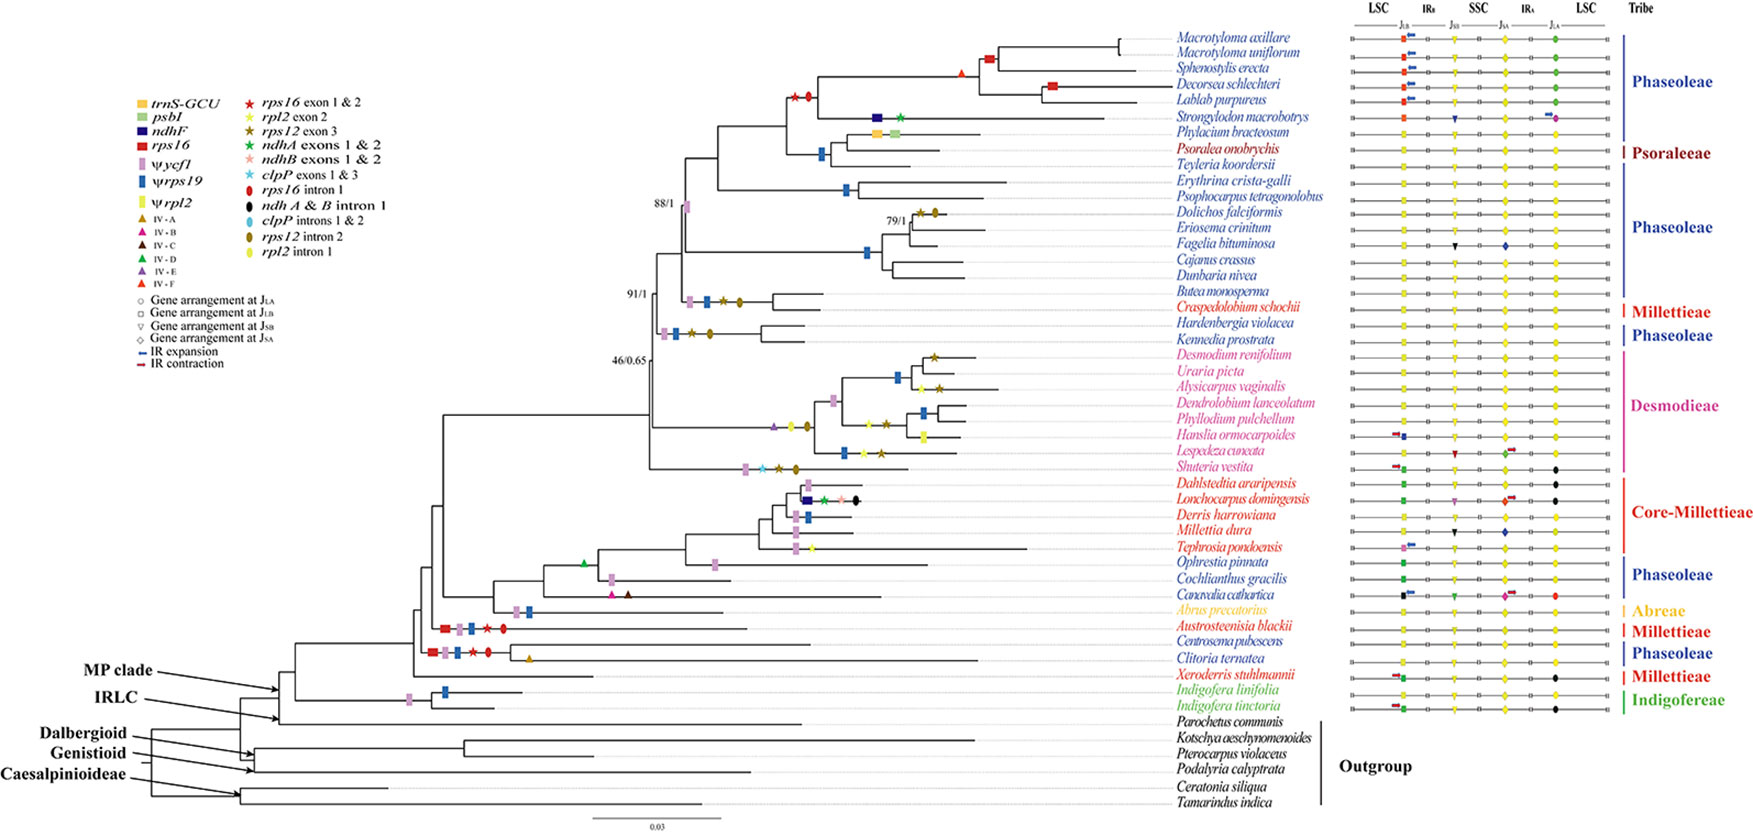 Frontiers New Insights Into The Plastome Evolution Of The